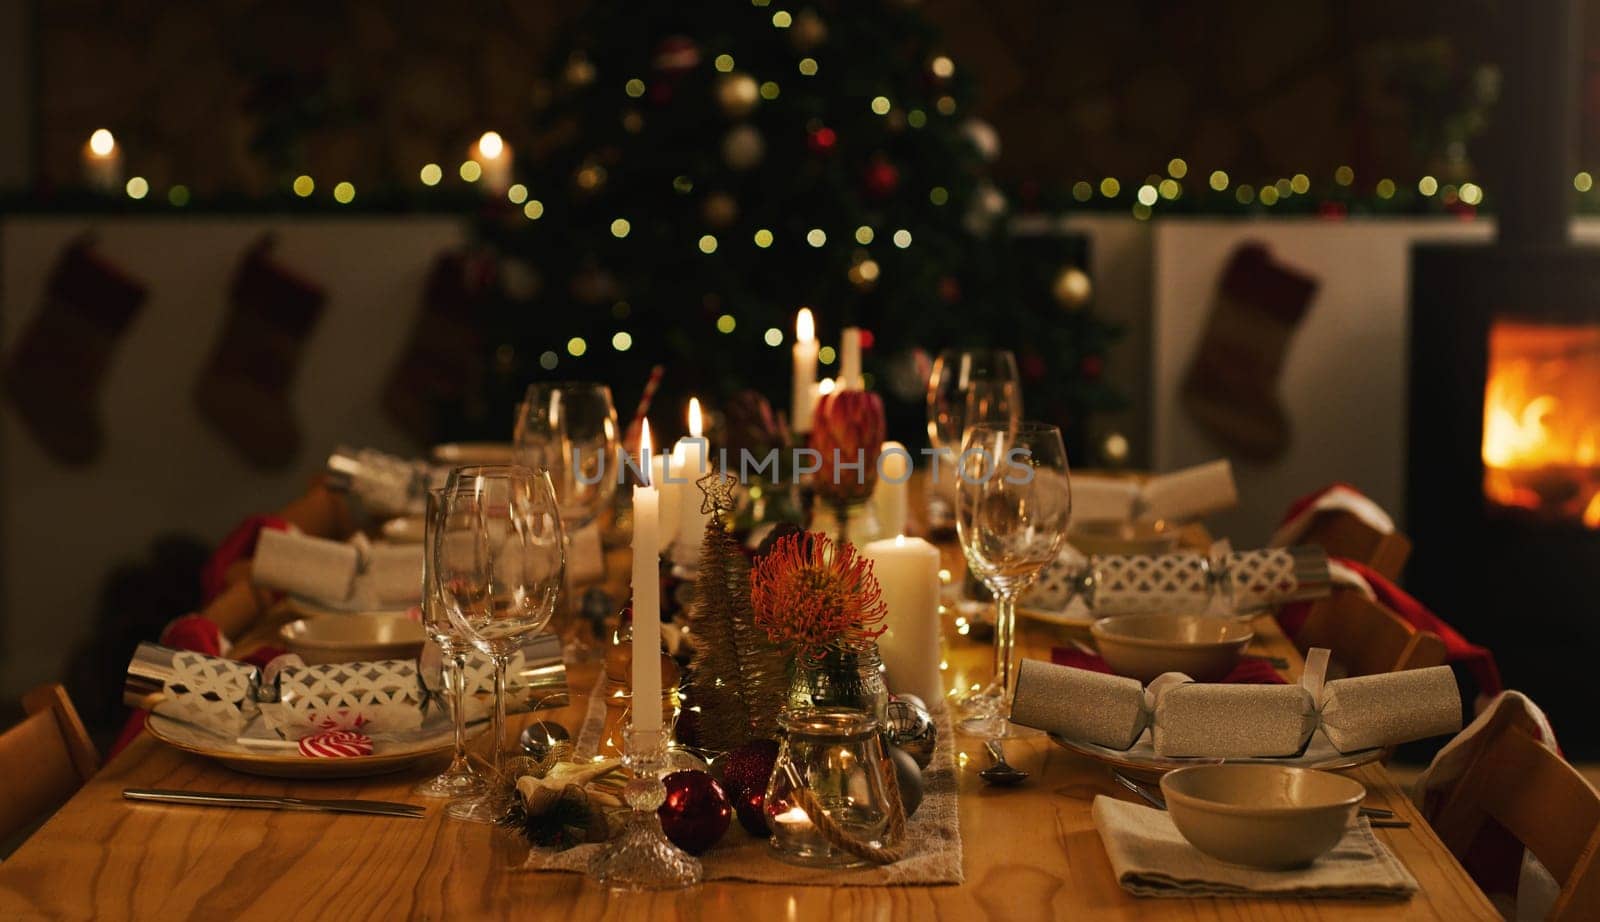 Dinner, table and Christmas in home with candles at night, love and celebration for holidays. Feast, dining and house or dark with lights for xmas, flowers and bowls or wine glasses at fireplace.